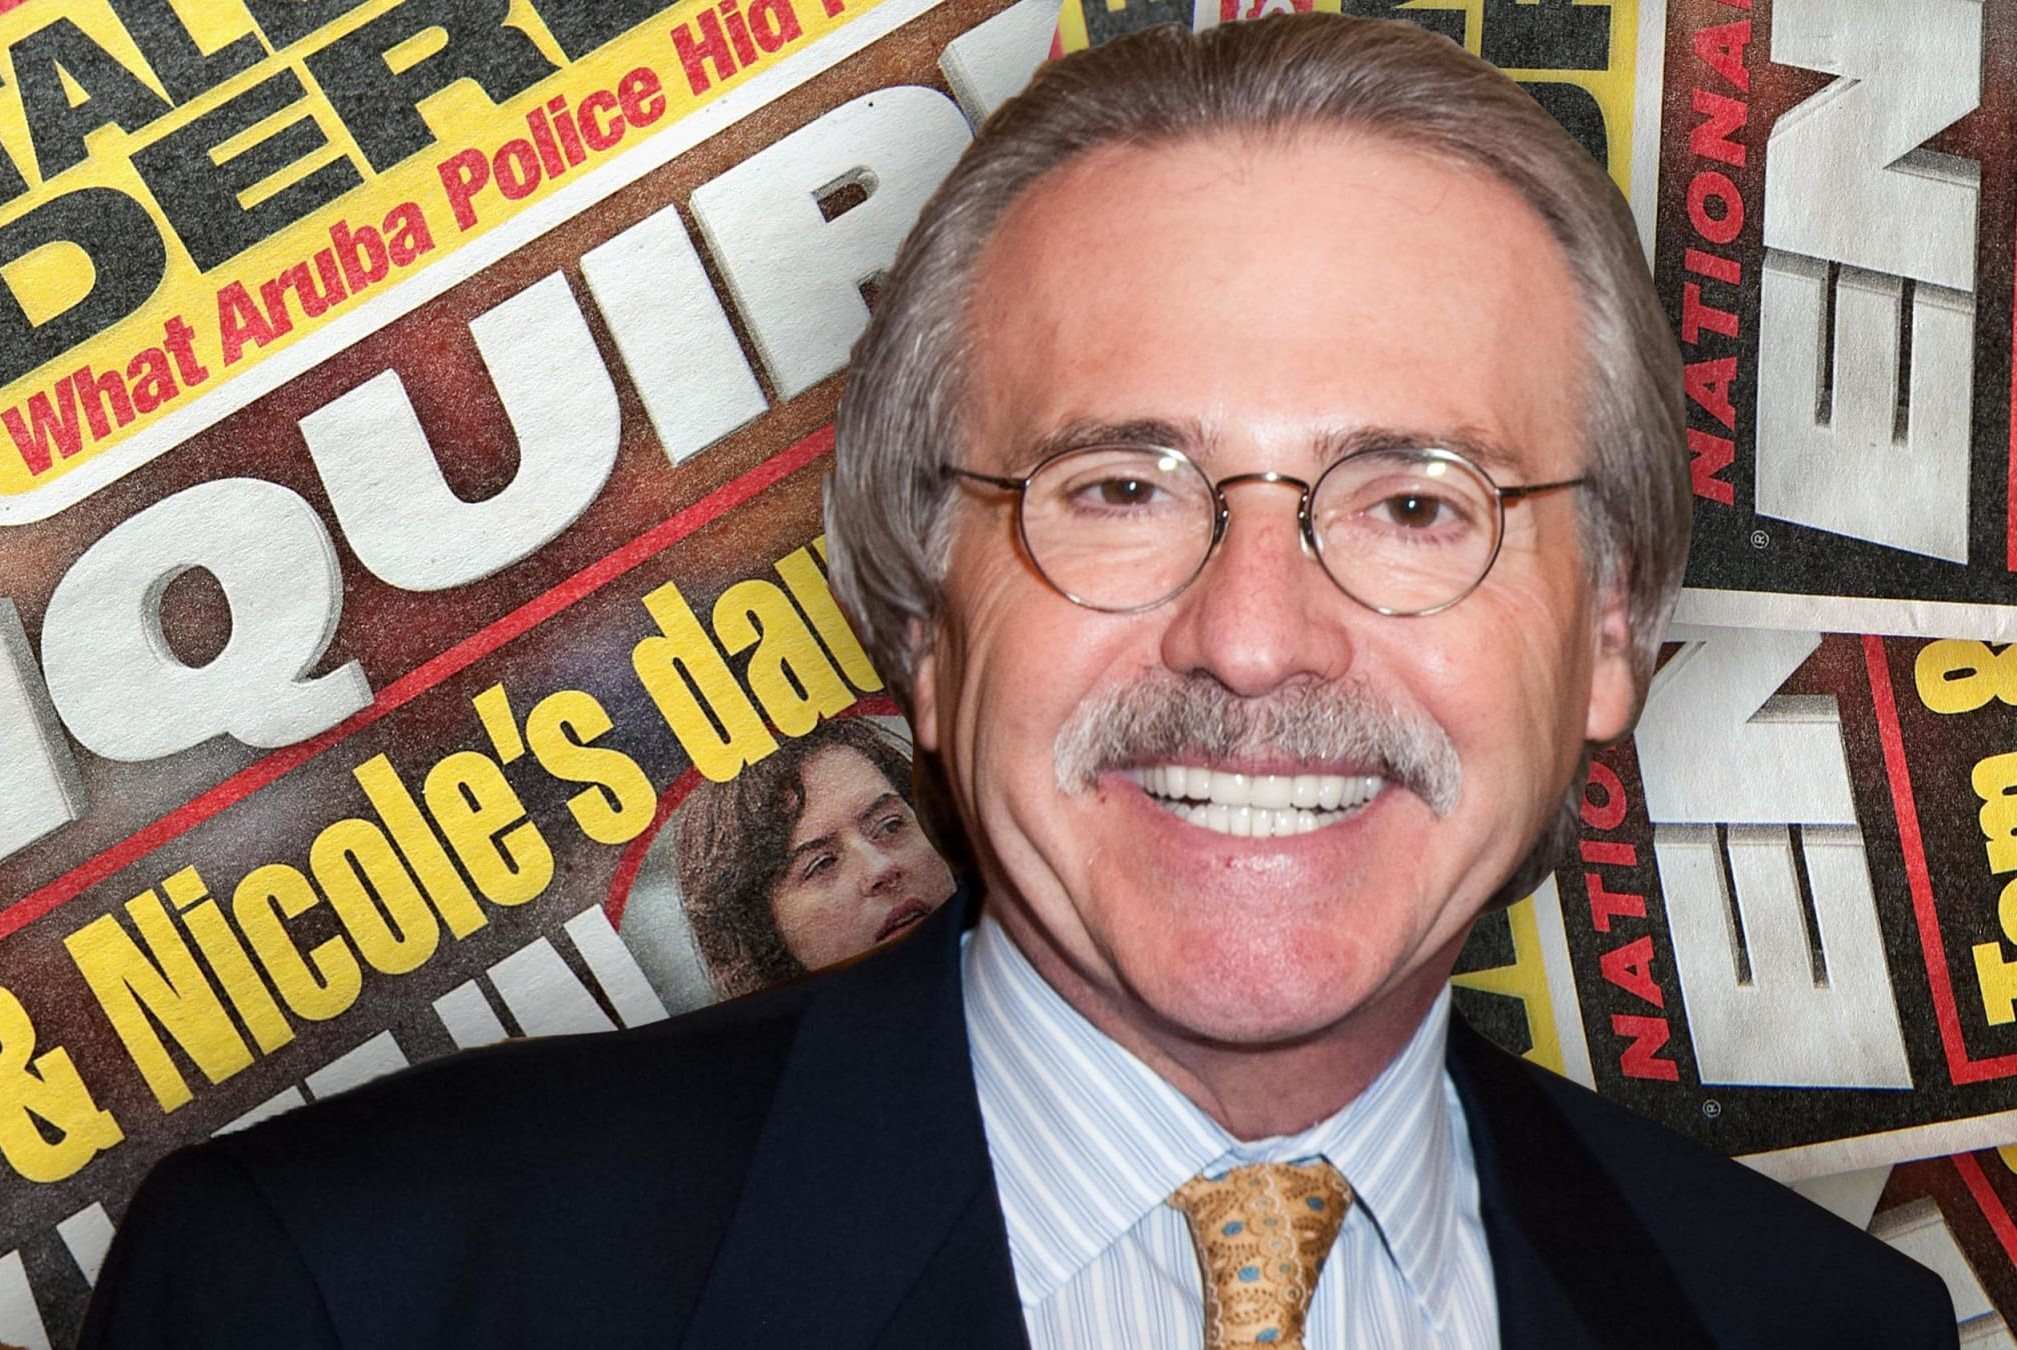 24-surprising-facts-about-david-pecker